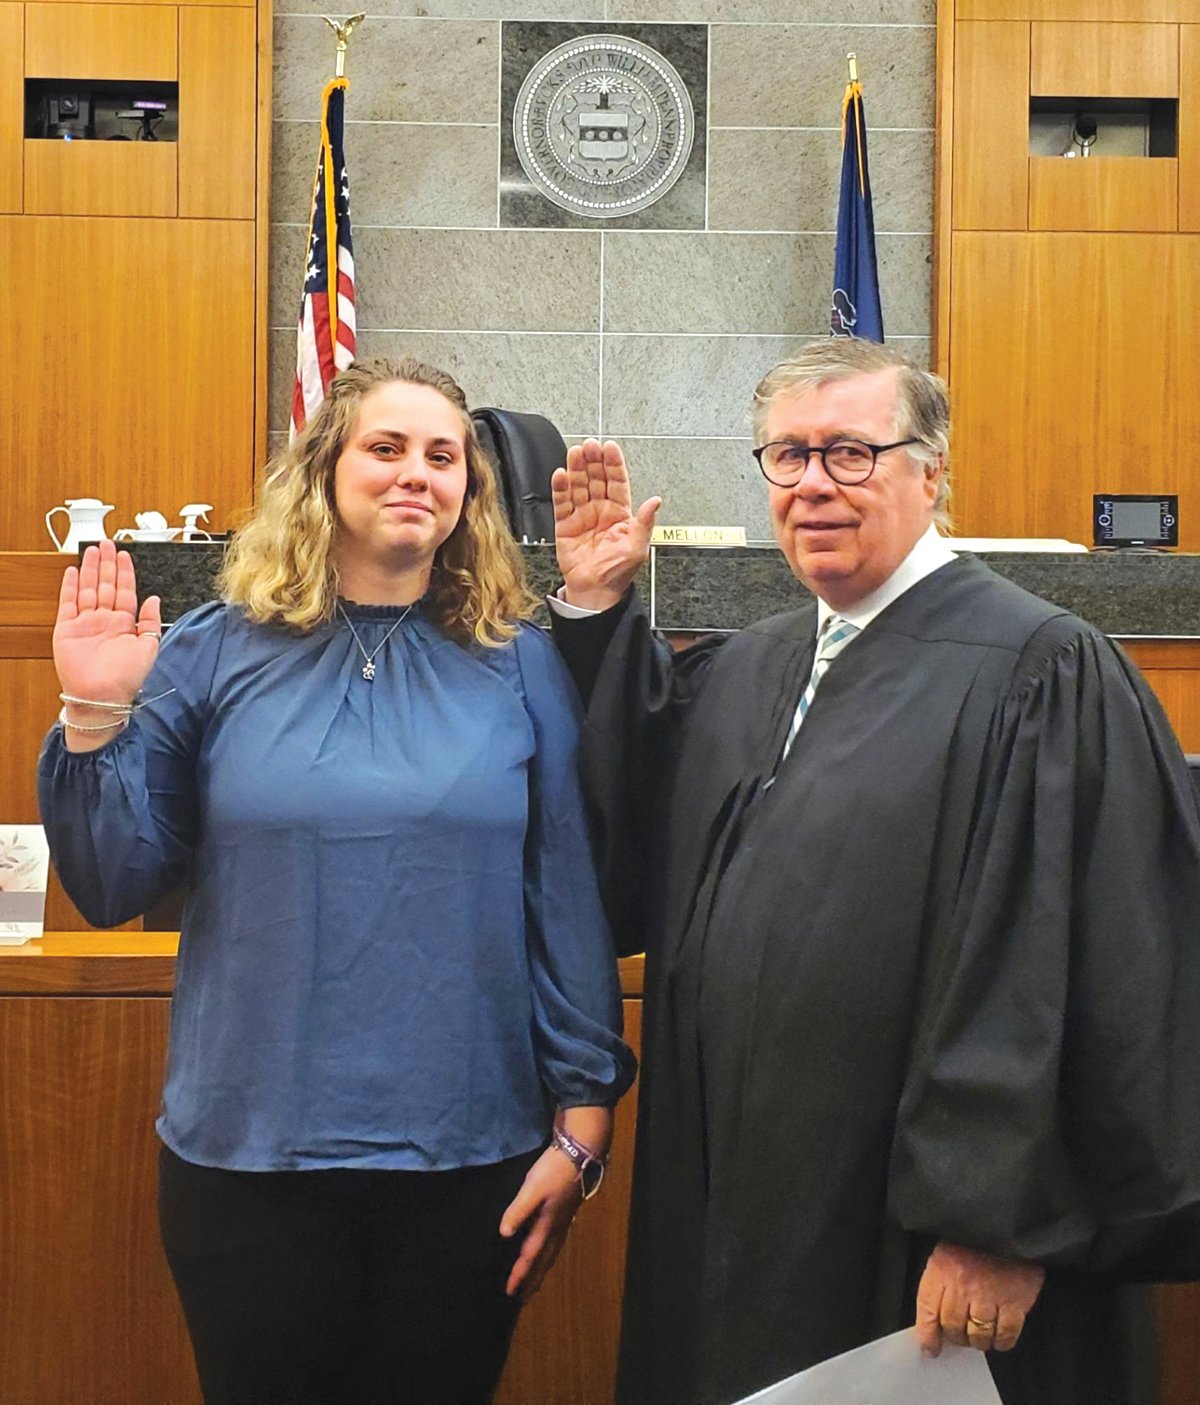 Bucks County SPCA
Lizz Knight was sworn in as a Bucks County SPCA humane society police officer by Judge Robert J. Mellon at the Bucks County Justice Center on Jan. 17.